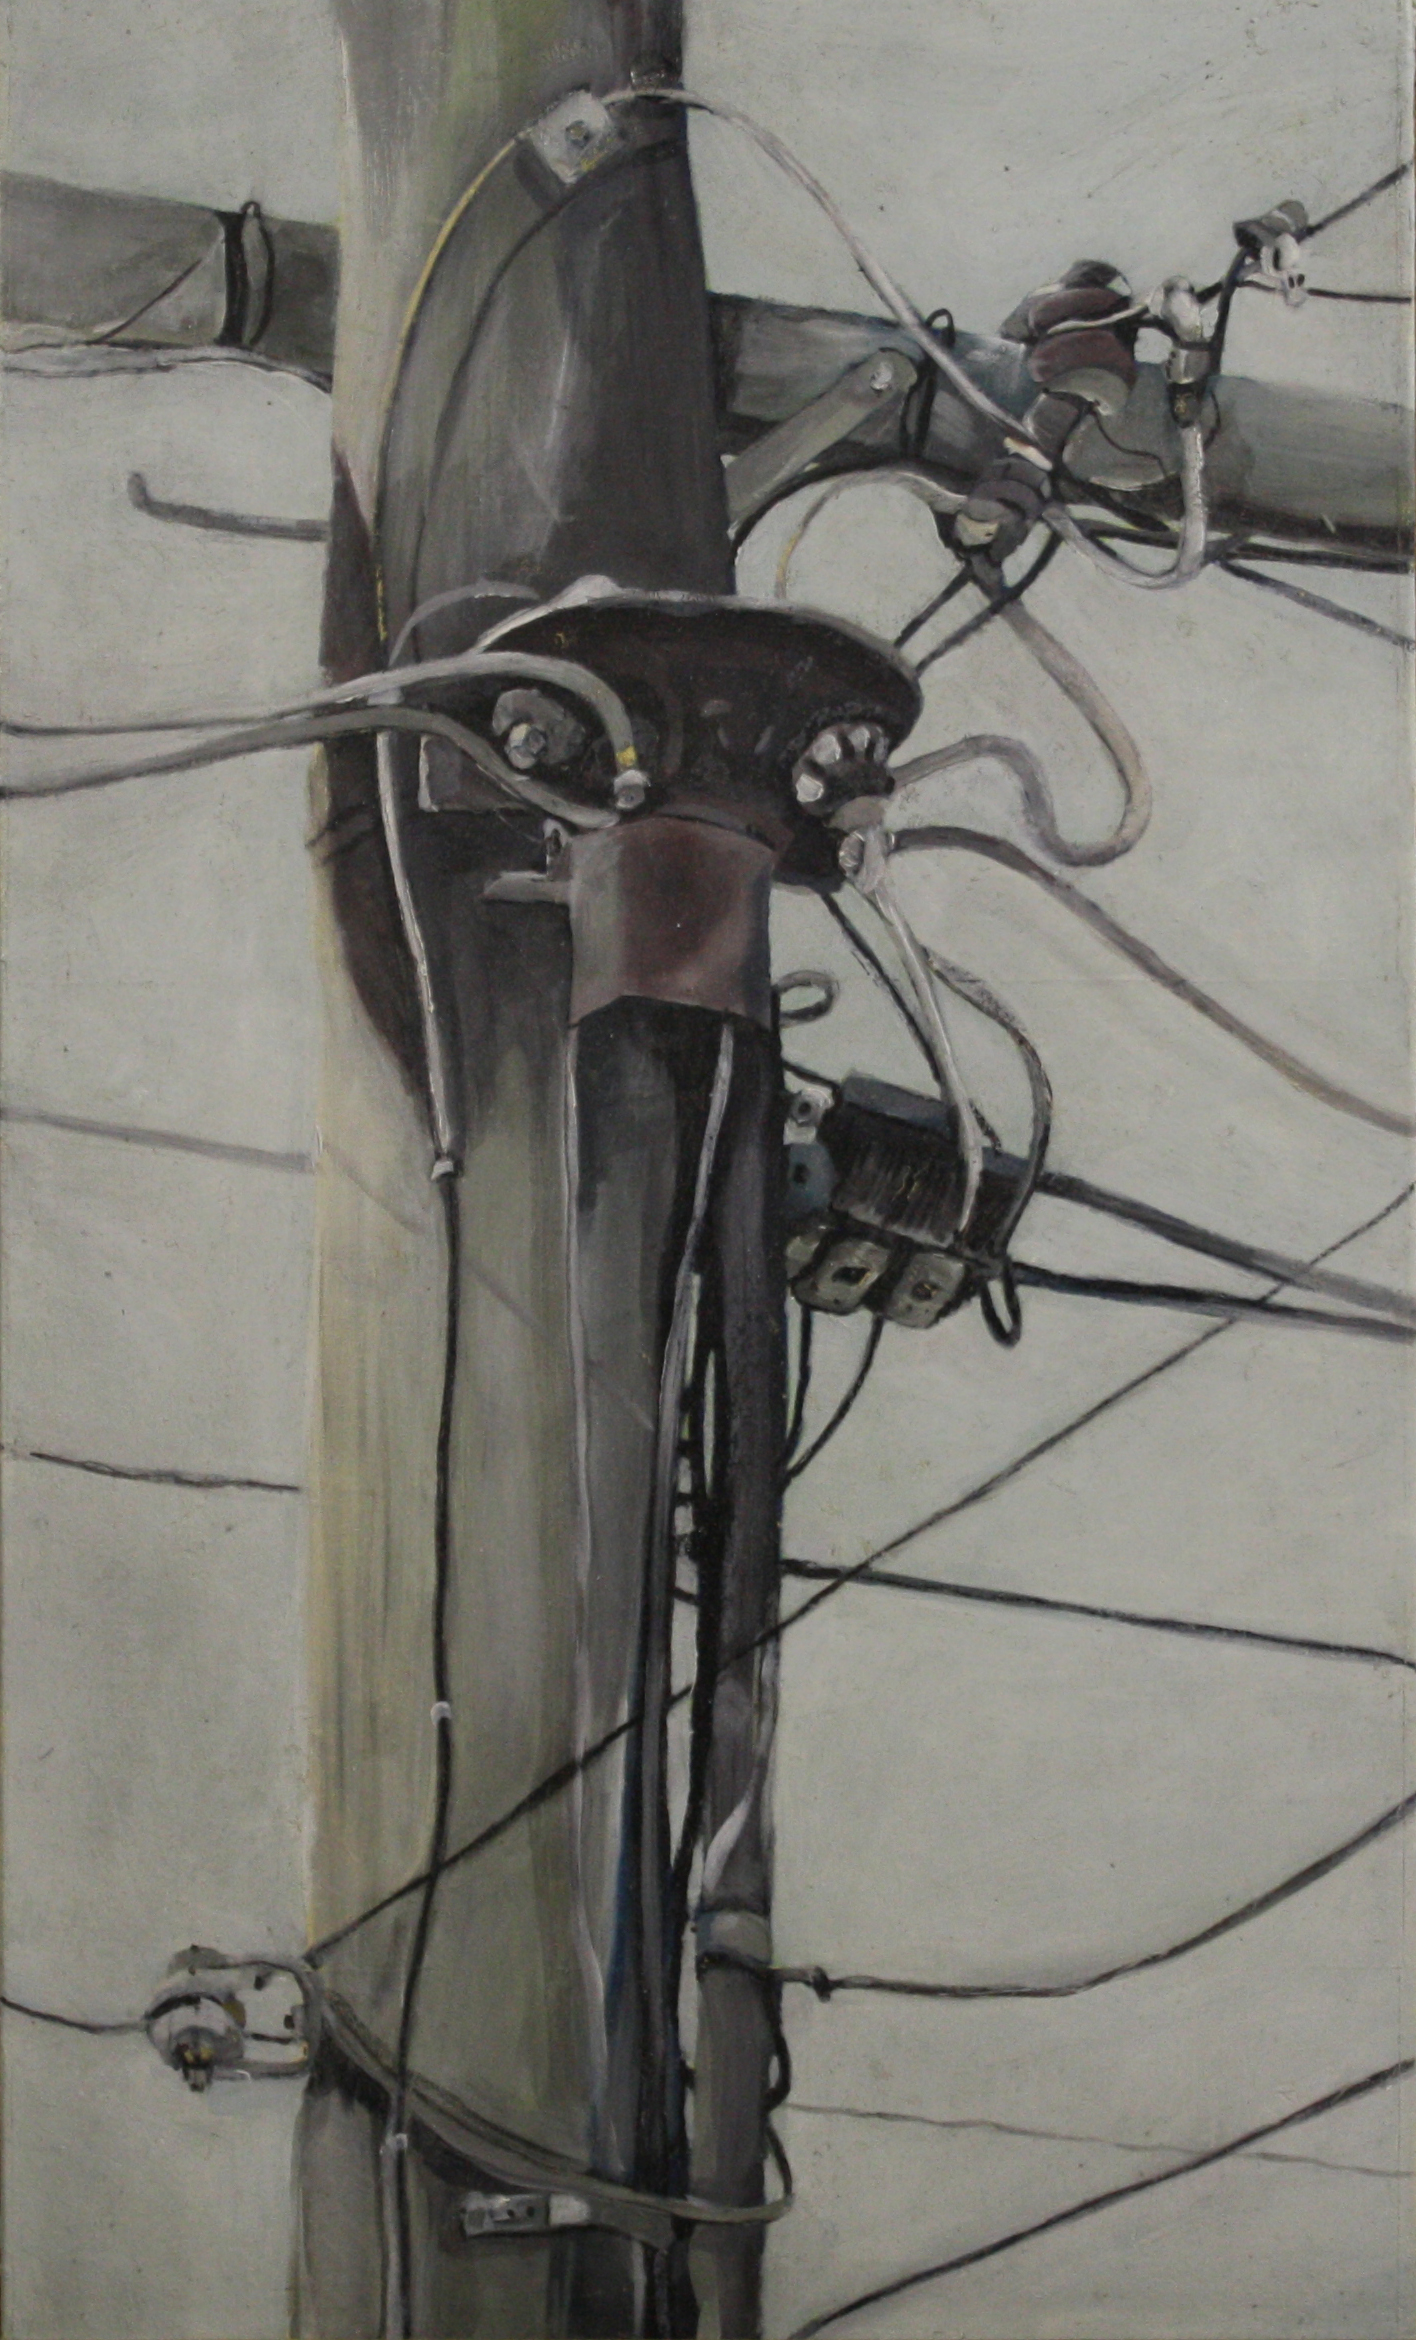  Components:  24712   2011,oil on canvas on hardboard  50 x 76 cm  private collection       